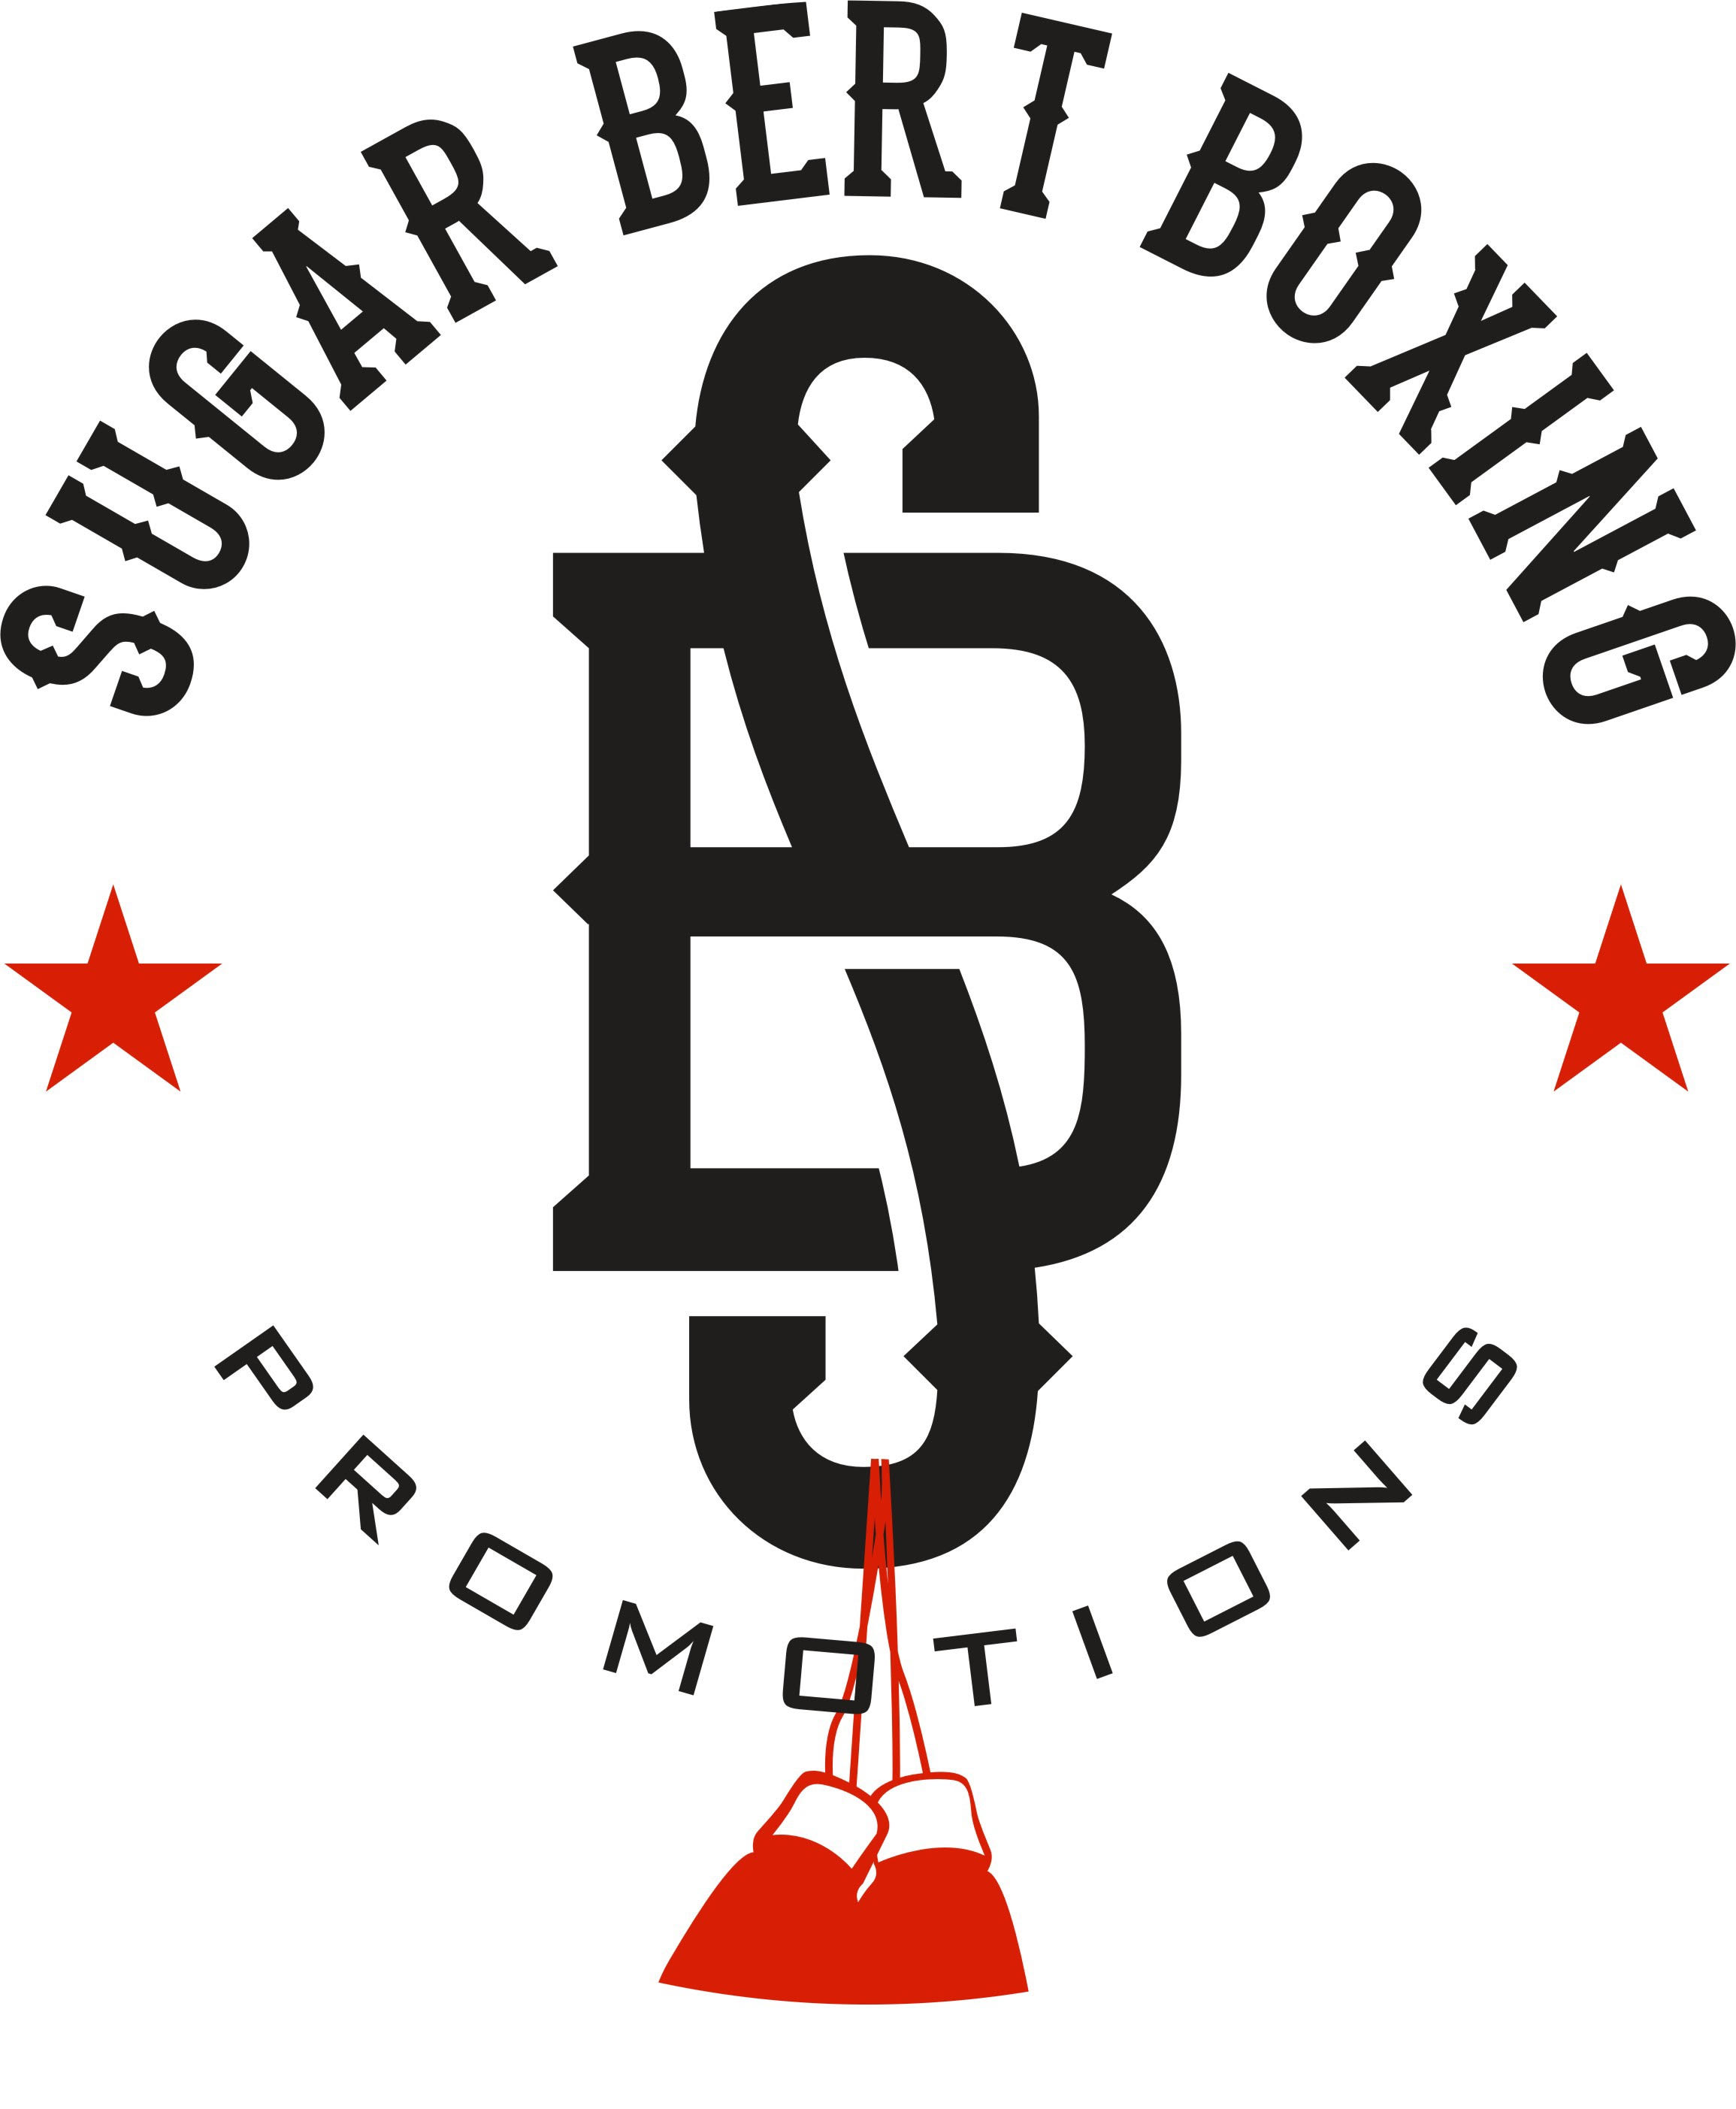 Sugar Bert Boxing/Title Belt National Championship Qualifier Comes to